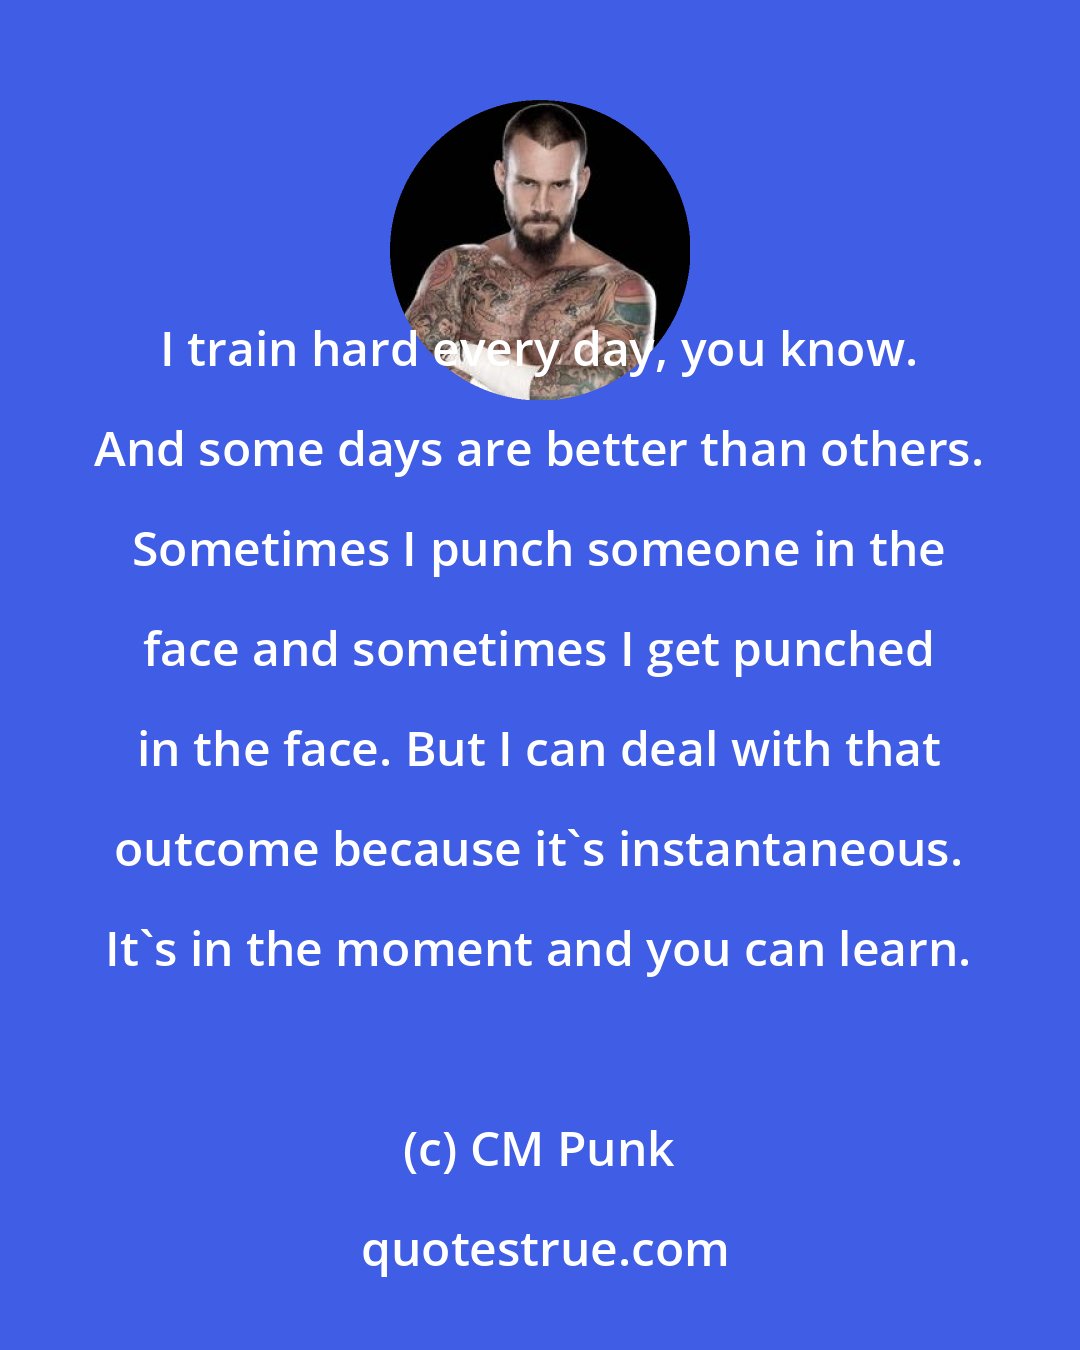 CM Punk: I train hard every day, you know. And some days are better than others. Sometimes I punch someone in the face and sometimes I get punched in the face. But I can deal with that outcome because it's instantaneous. It's in the moment and you can learn.